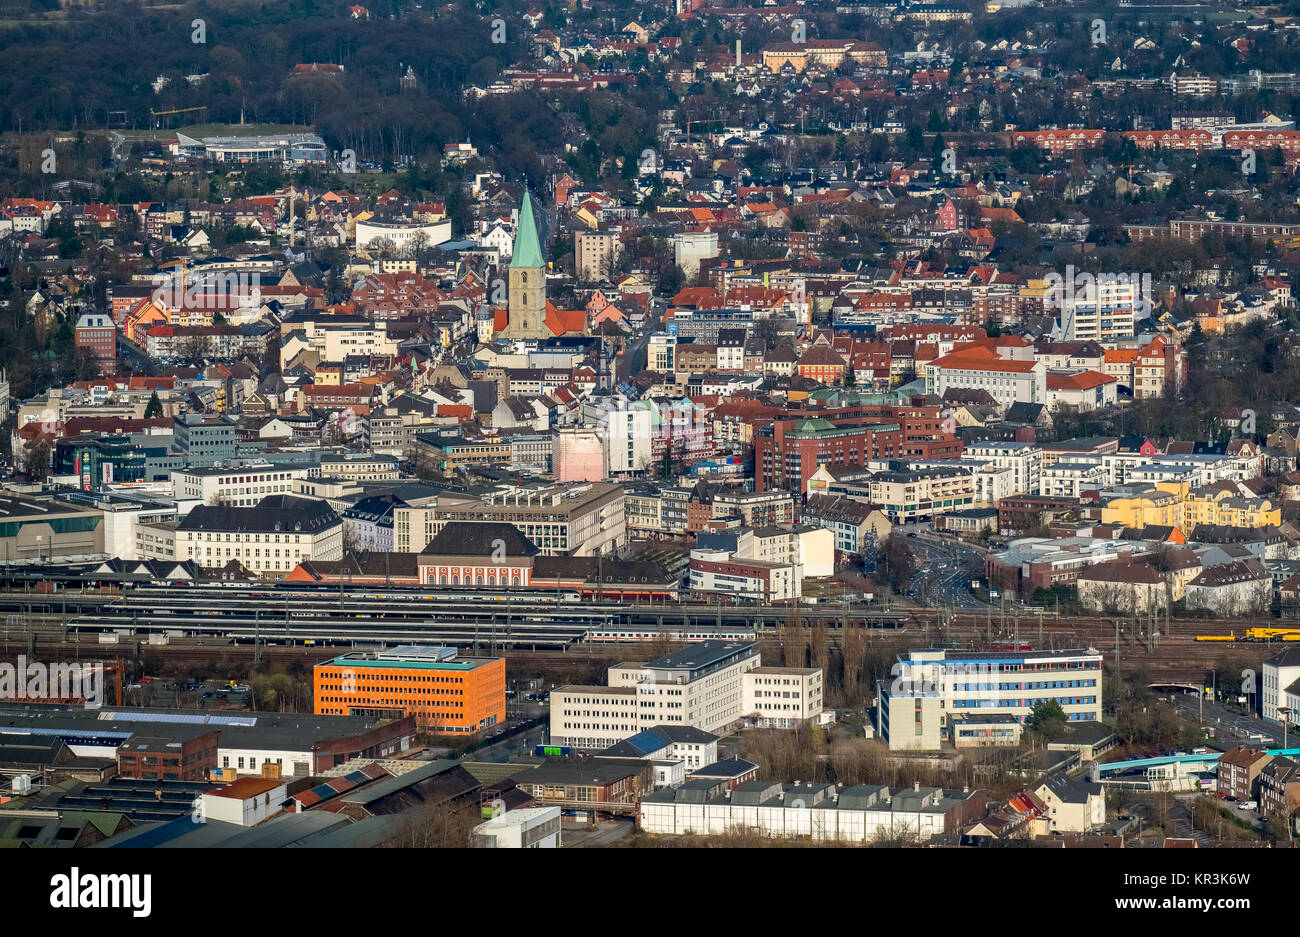 Overview on Hamm, Pauluskirche, Central Station, Distance from the West, Hamm, Ruhr area, North Rhine-Westphalia, Germany, Overview on Hamm, Pauluskir Stock Photo